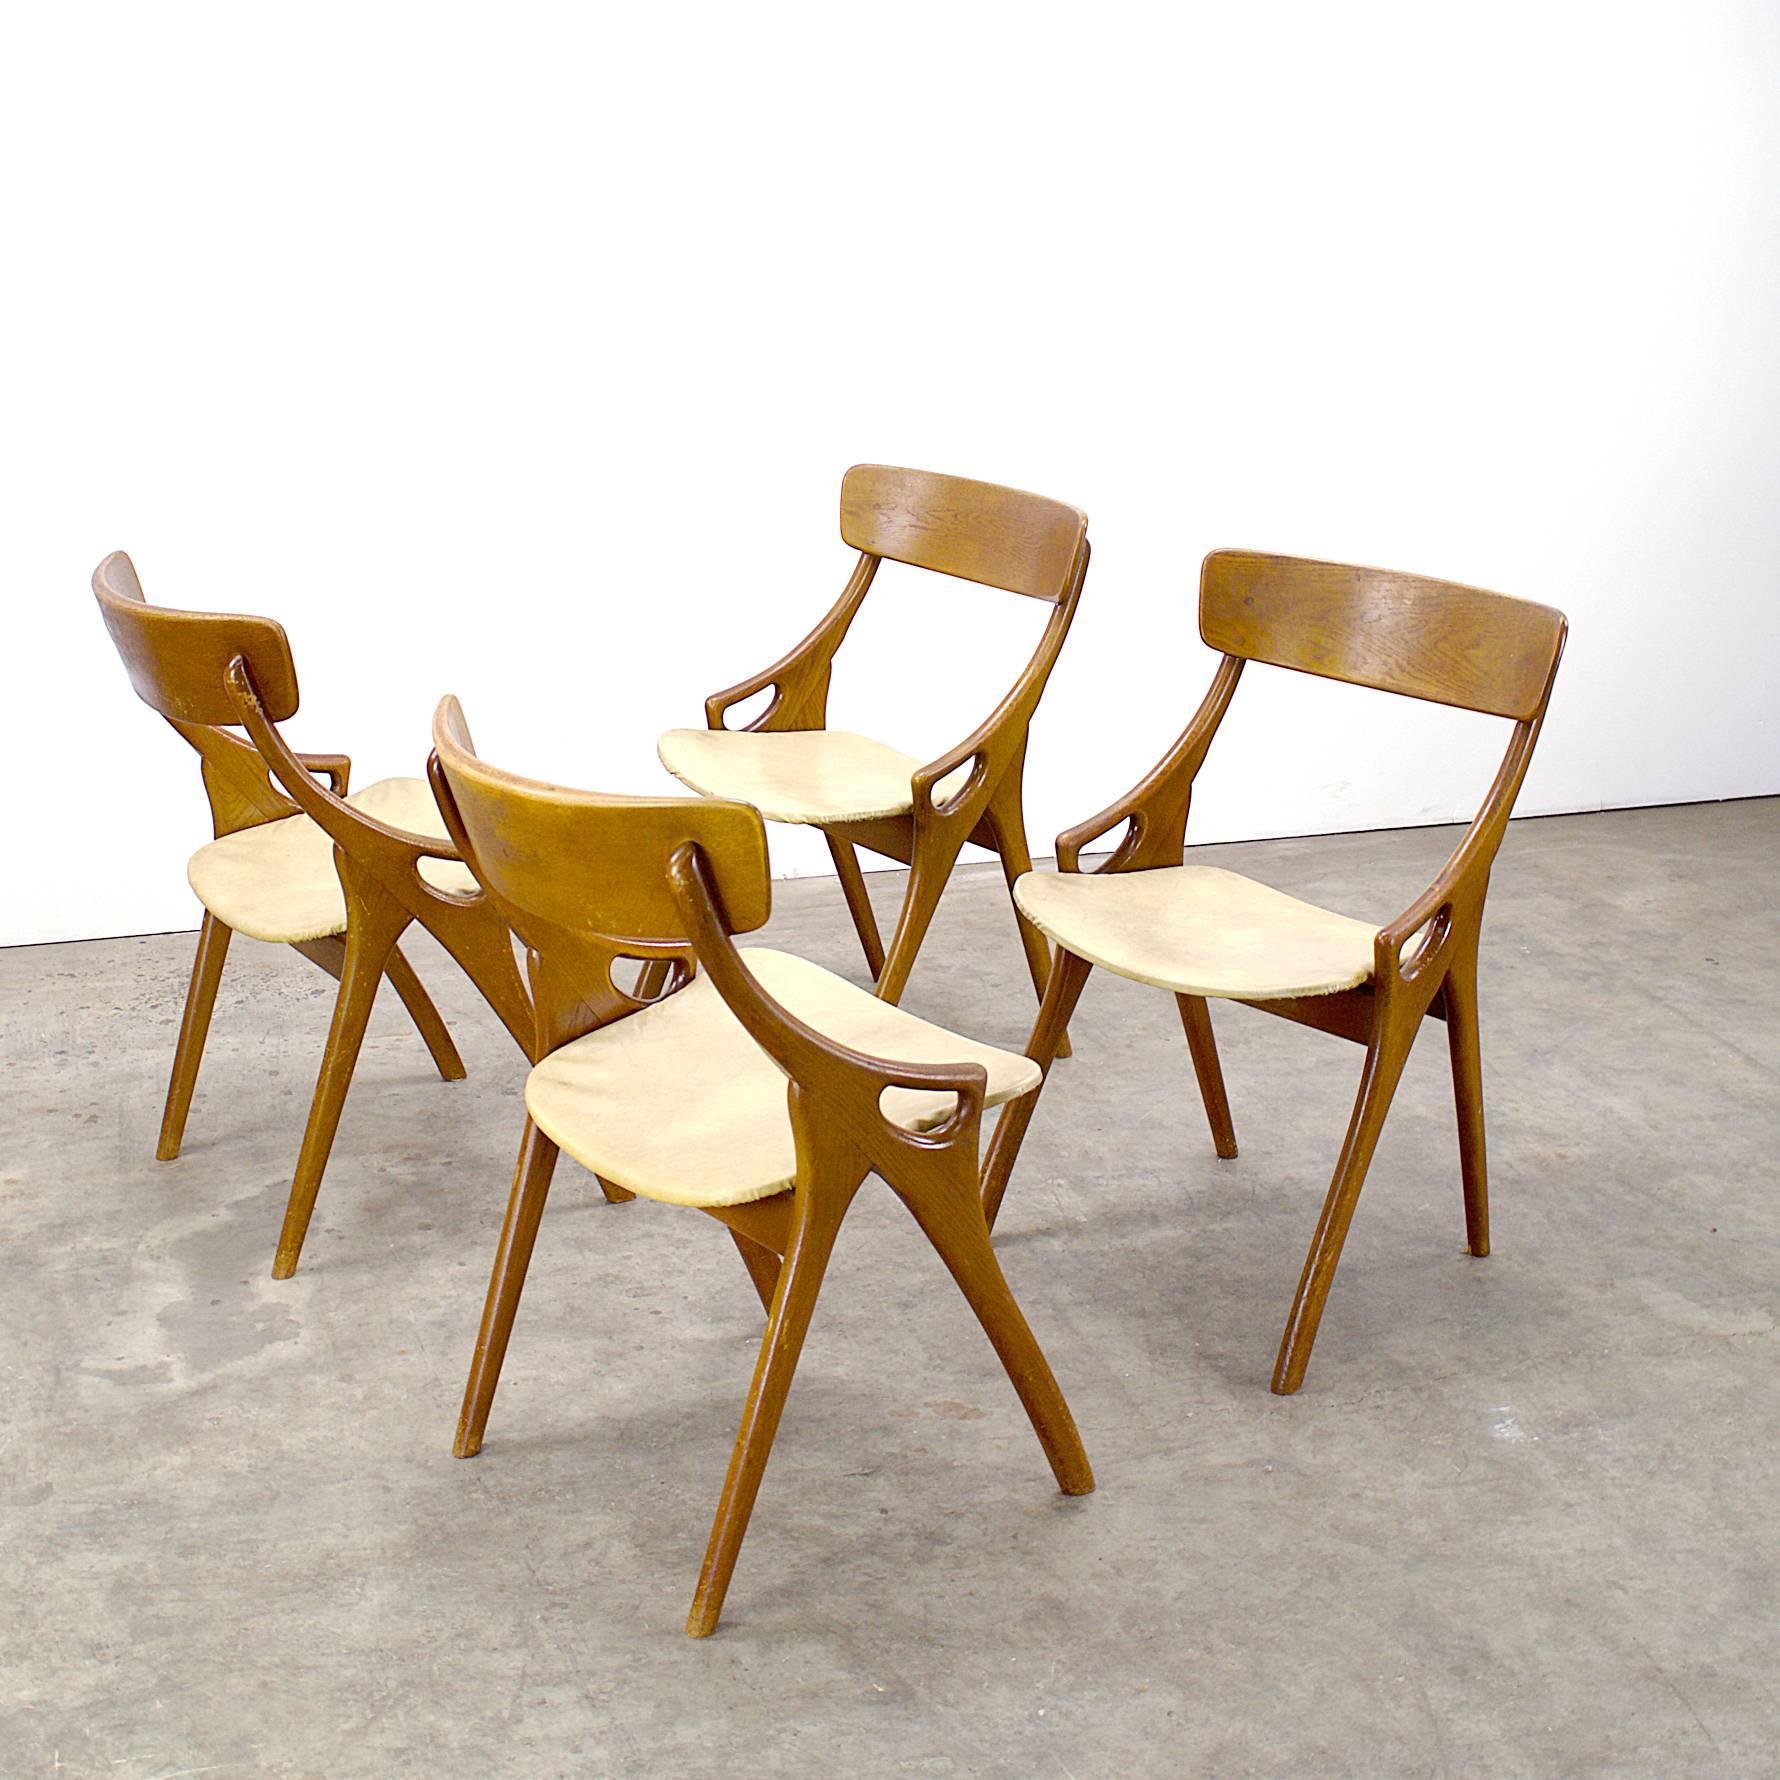 One set of four Arne Hovmand Olsen dining chairs for Mogens Kold Furniture. Wooden frame, and plywood seat decorated with skai seating. The skai might need attention, is in vintage condition. The chairs and wood are in very good condition. Seat